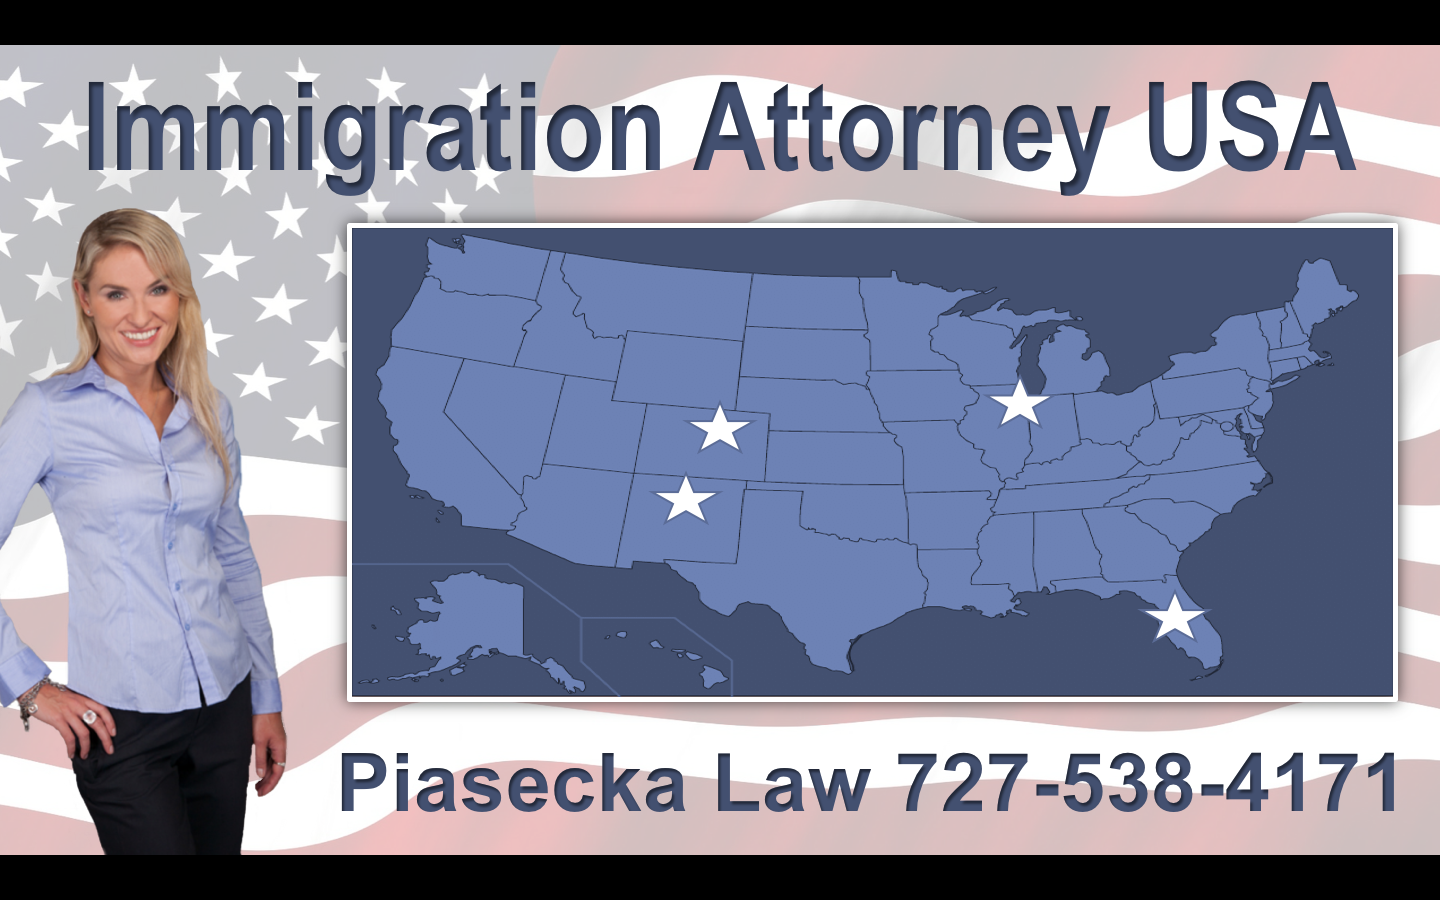 Immigration Attorney USA Piasecka Law